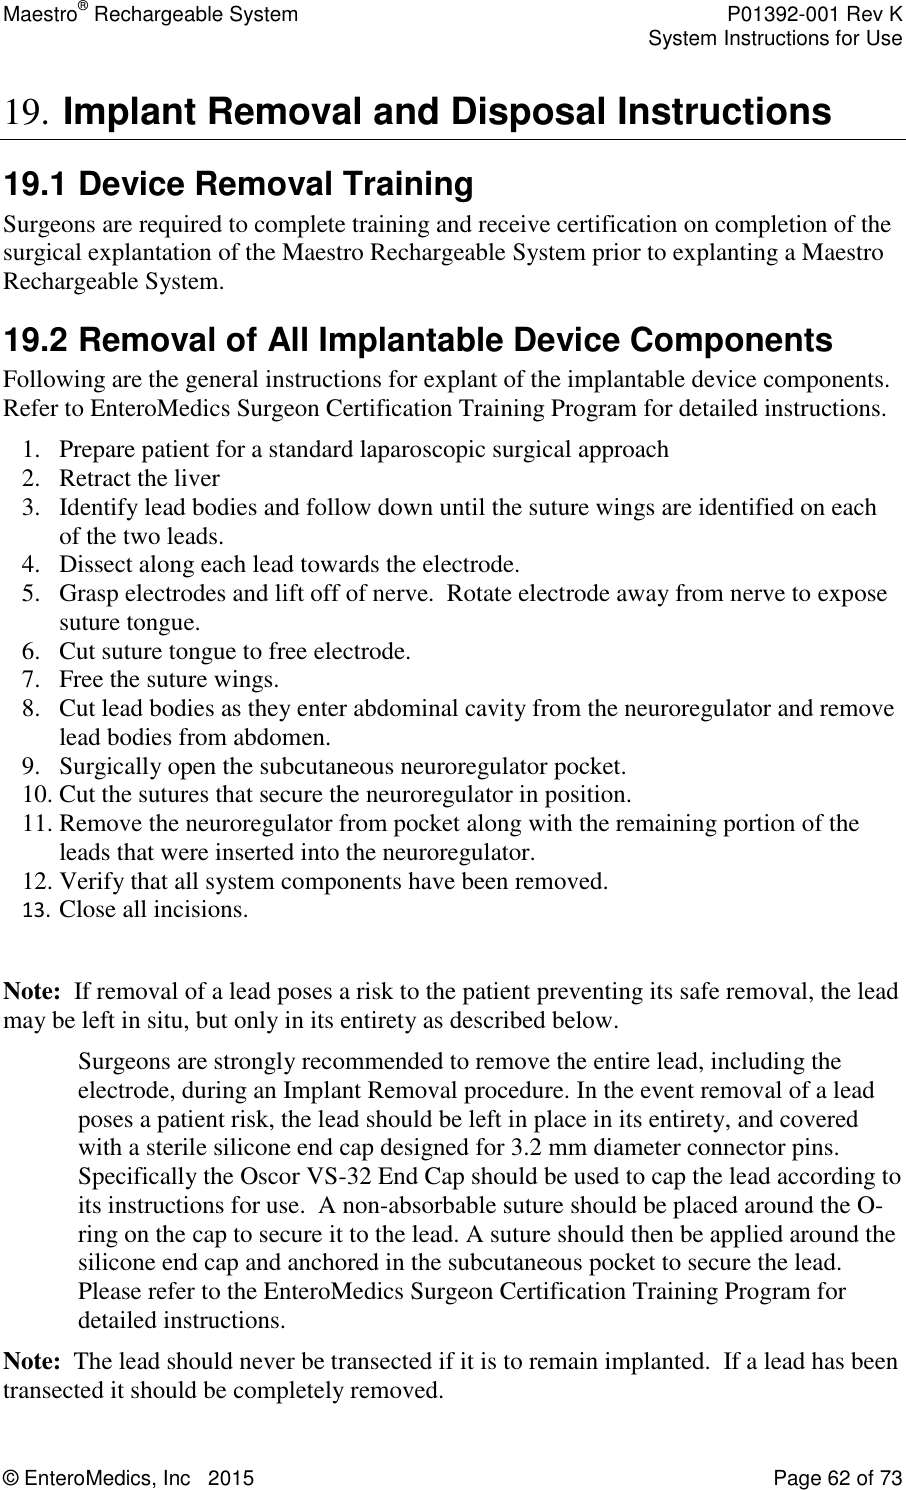 Maestro® Rechargeable System    P01392-001 Rev K     System Instructions for Use  © EnteroMedics, Inc   2015  Page 62 of 73  19. Implant Removal and Disposal Instructions 19.1 Device Removal Training Surgeons are required to complete training and receive certification on completion of the surgical explantation of the Maestro Rechargeable System prior to explanting a Maestro Rechargeable System. 19.2 Removal of All Implantable Device Components Following are the general instructions for explant of the implantable device components. Refer to EnteroMedics Surgeon Certification Training Program for detailed instructions. 1. Prepare patient for a standard laparoscopic surgical approach 2. Retract the liver 3. Identify lead bodies and follow down until the suture wings are identified on each of the two leads. 4. Dissect along each lead towards the electrode. 5. Grasp electrodes and lift off of nerve.  Rotate electrode away from nerve to expose suture tongue. 6. Cut suture tongue to free electrode. 7. Free the suture wings. 8. Cut lead bodies as they enter abdominal cavity from the neuroregulator and remove lead bodies from abdomen. 9. Surgically open the subcutaneous neuroregulator pocket. 10. Cut the sutures that secure the neuroregulator in position. 11. Remove the neuroregulator from pocket along with the remaining portion of the leads that were inserted into the neuroregulator. 12. Verify that all system components have been removed. 13. Close all incisions.    Note:  If removal of a lead poses a risk to the patient preventing its safe removal, the lead may be left in situ, but only in its entirety as described below.   Surgeons are strongly recommended to remove the entire lead, including the electrode, during an Implant Removal procedure. In the event removal of a lead poses a patient risk, the lead should be left in place in its entirety, and covered with a sterile silicone end cap designed for 3.2 mm diameter connector pins. Specifically the Oscor VS-32 End Cap should be used to cap the lead according to its instructions for use.  A non-absorbable suture should be placed around the O-ring on the cap to secure it to the lead. A suture should then be applied around the silicone end cap and anchored in the subcutaneous pocket to secure the lead. Please refer to the EnteroMedics Surgeon Certification Training Program for detailed instructions. Note:  The lead should never be transected if it is to remain implanted.  If a lead has been transected it should be completely removed.  